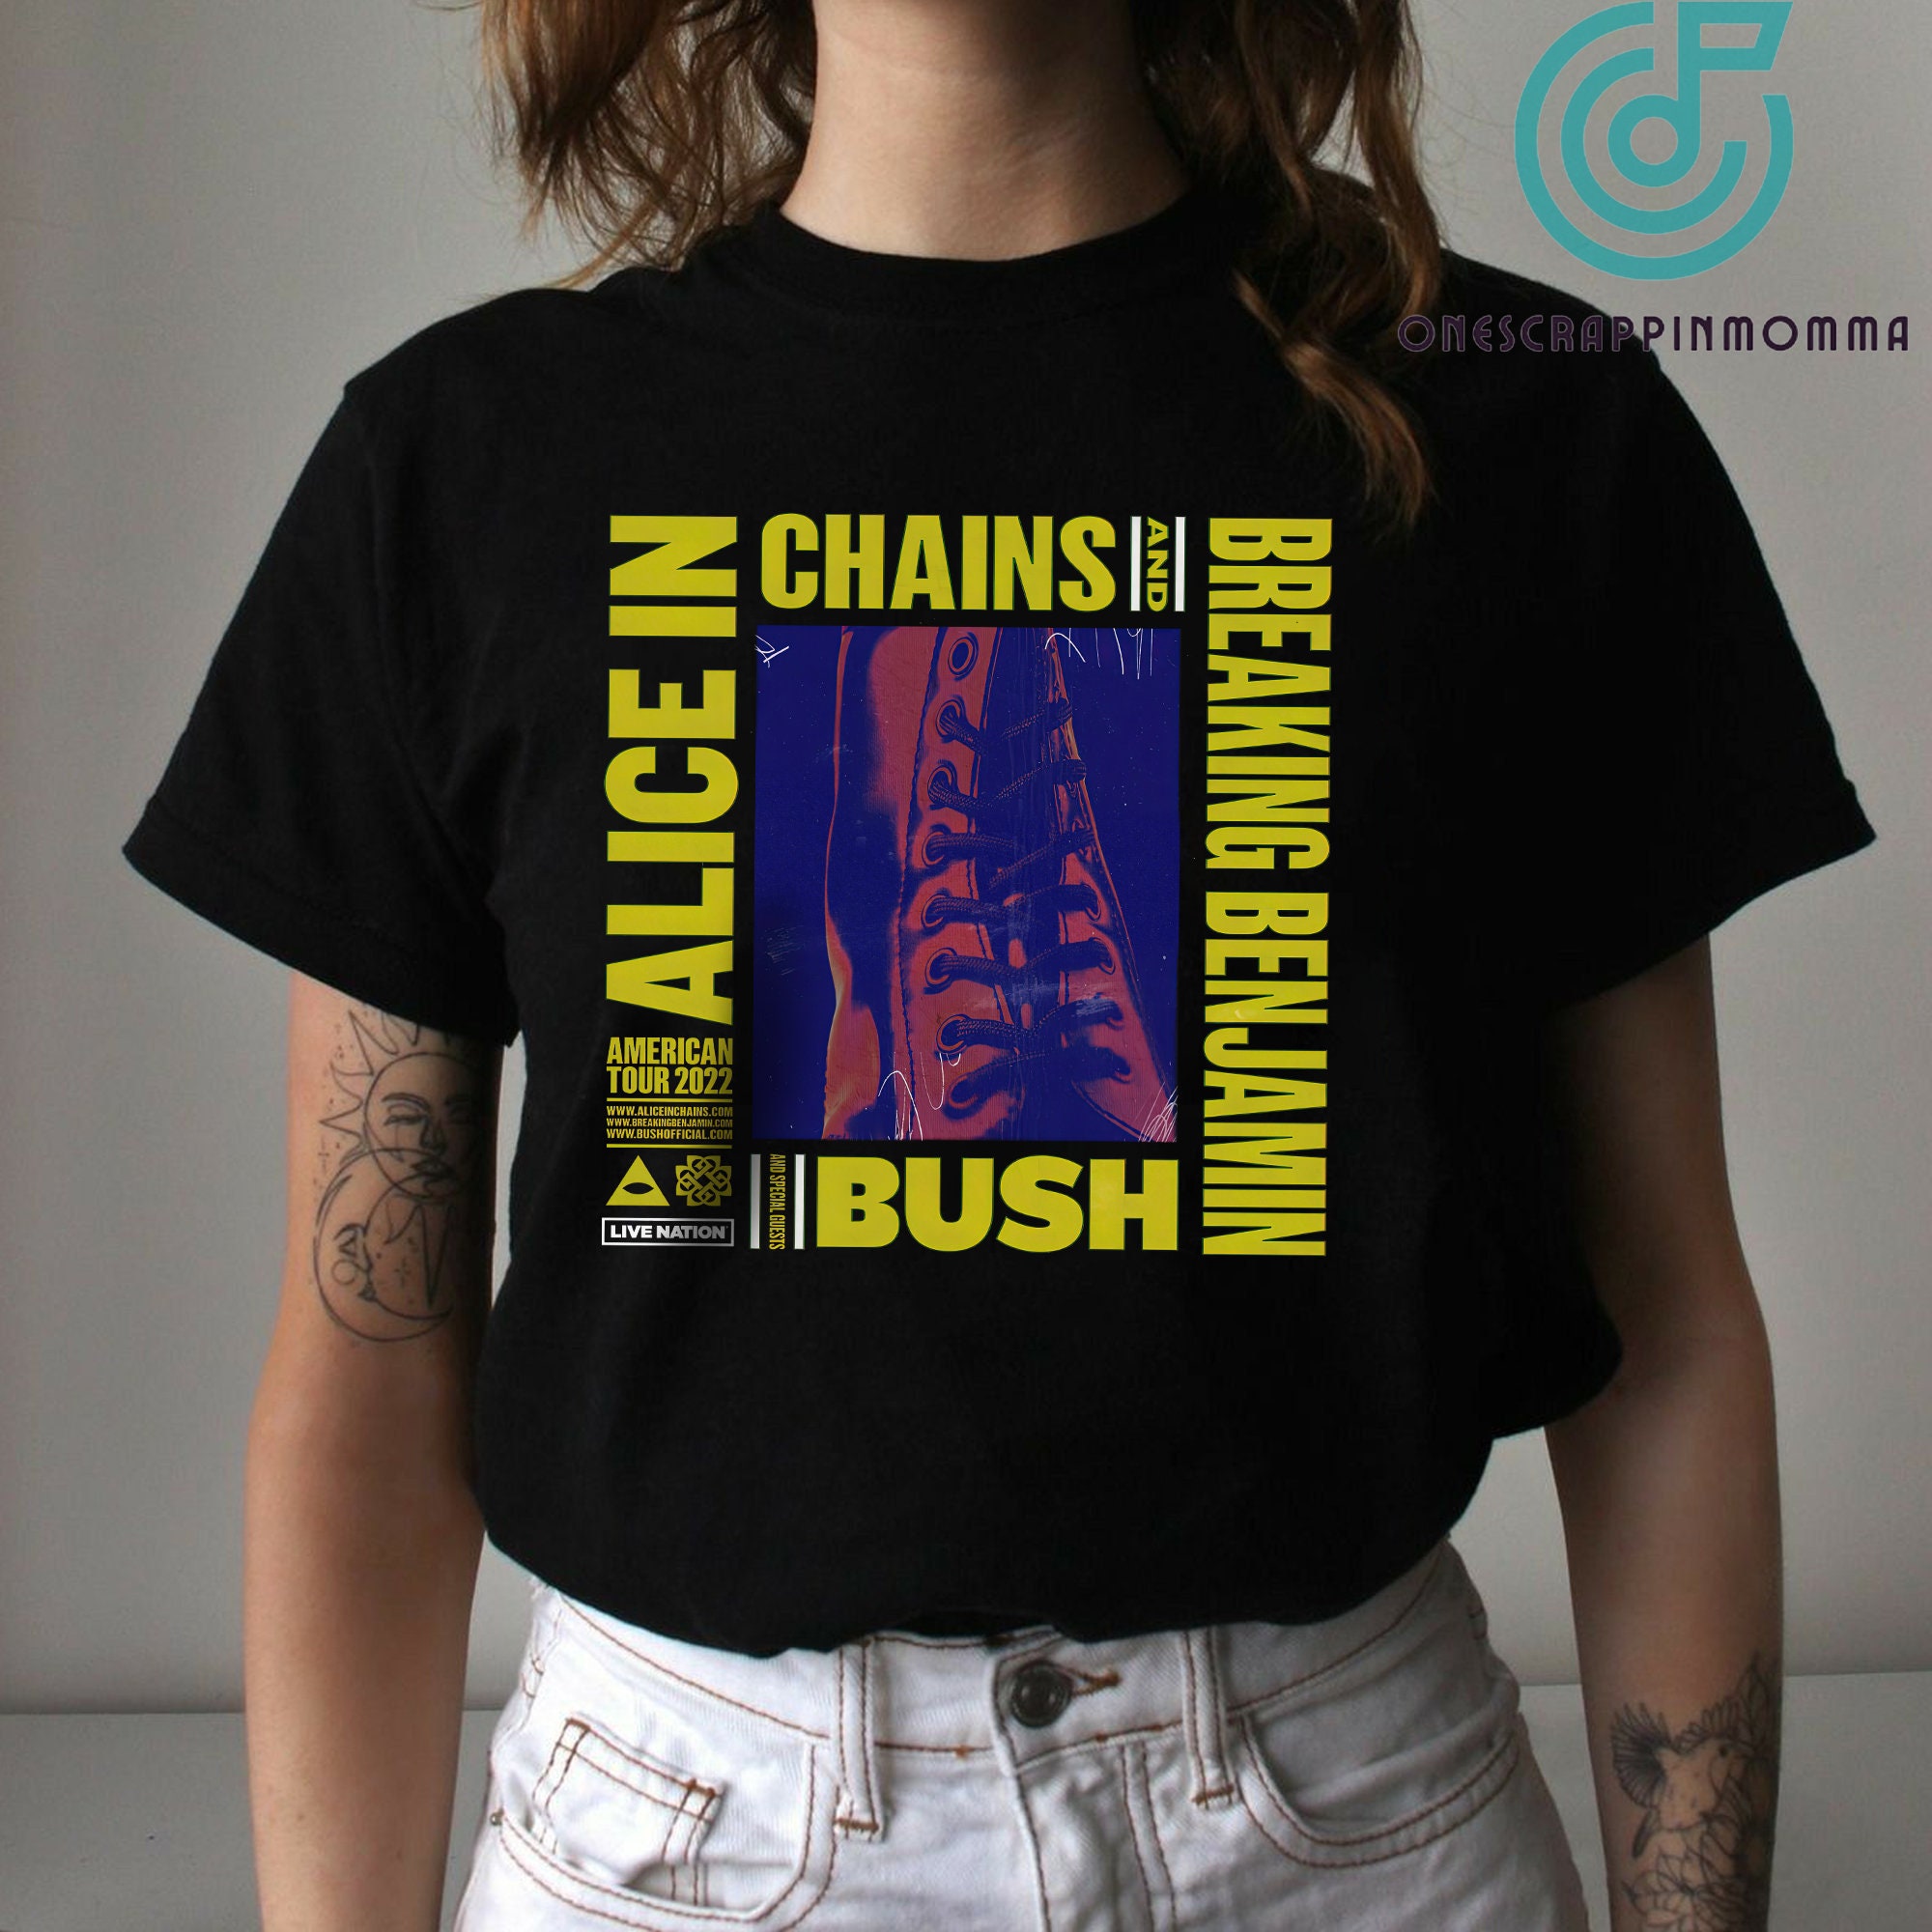 Alice In Chains & Breaking Benjamin With Special Guest Bush American Tour 2022 Unisex T-Shirt